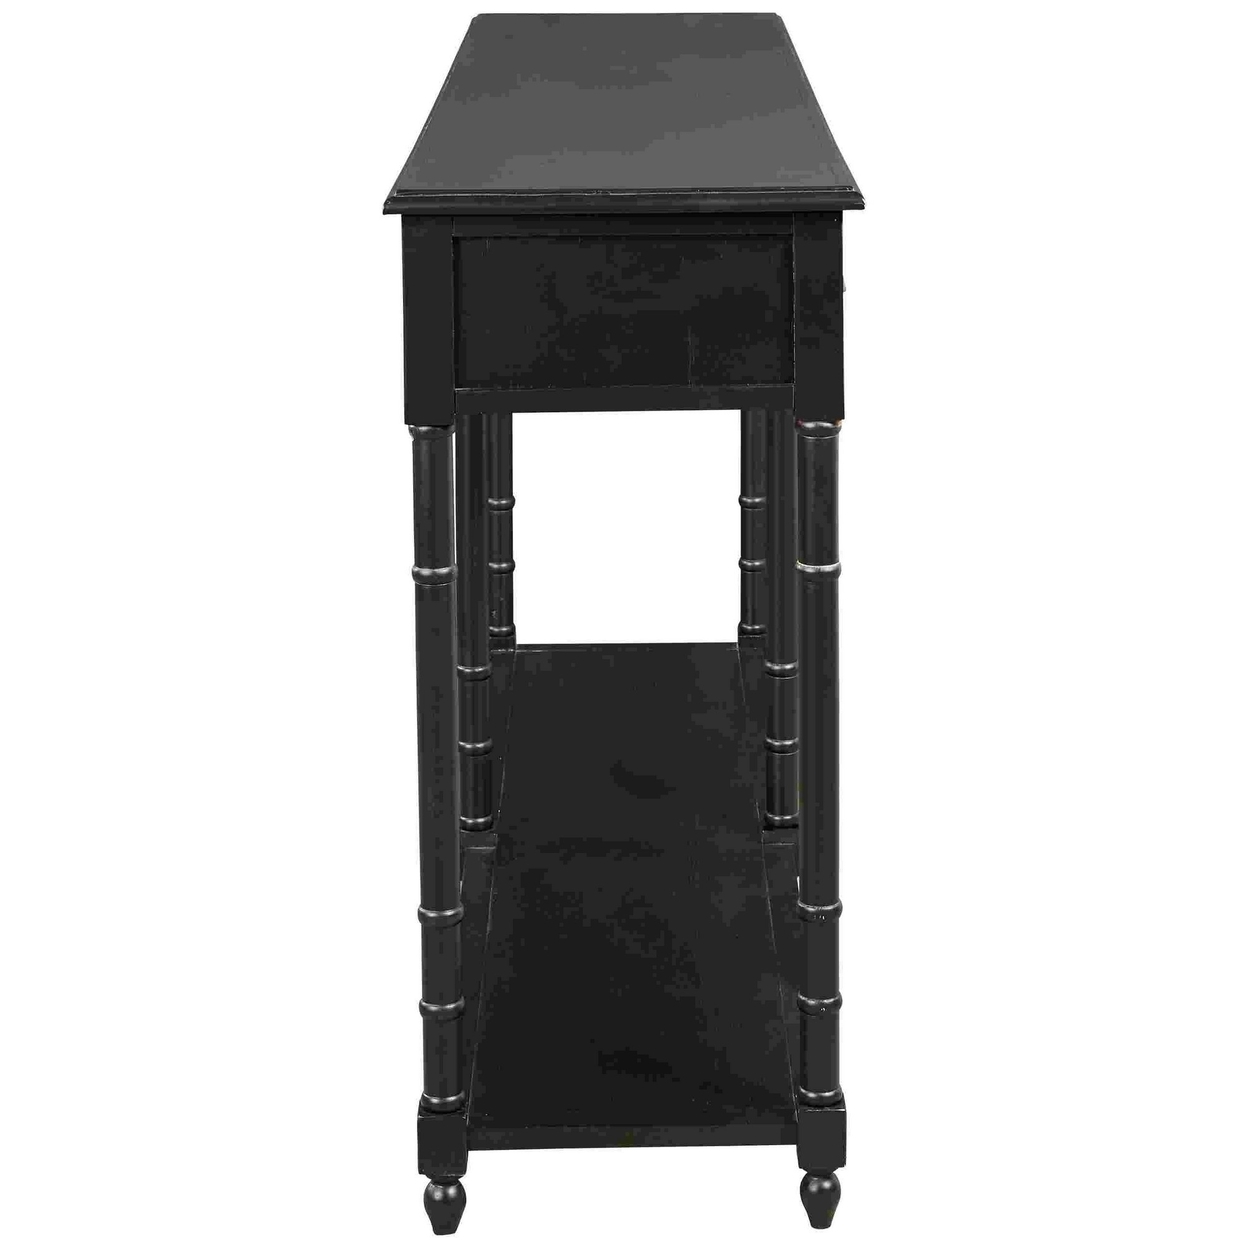 Wooden Console Sofa Table With 4 Spacious Drawers, Black- Saltoro Sherpi